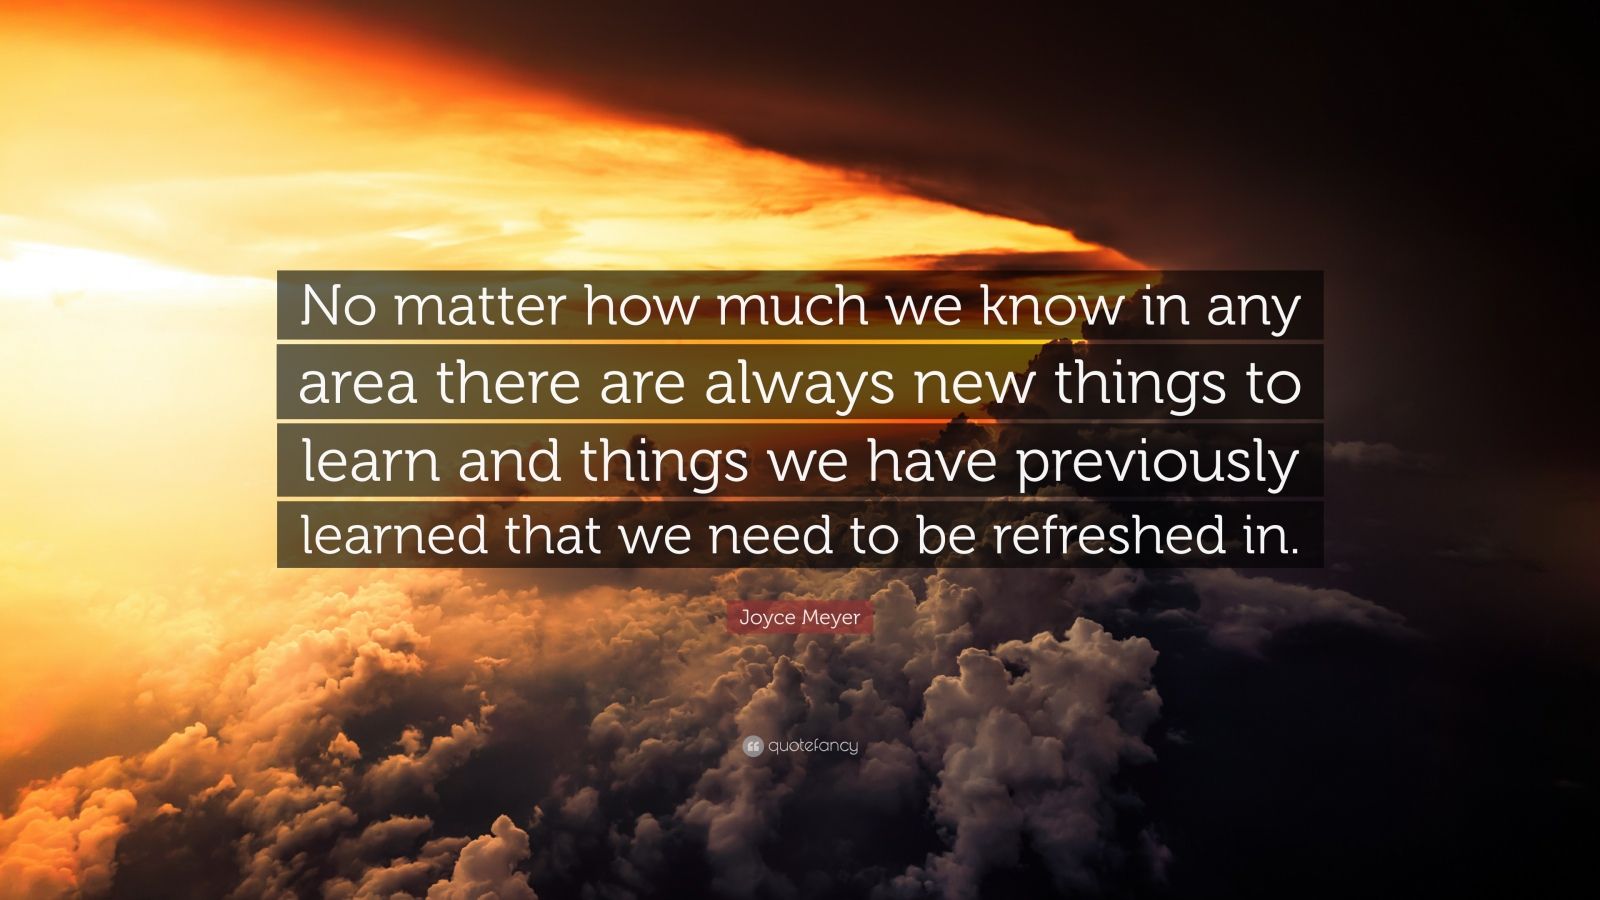 Joyce Meyer Quote “No matter how much we know in any area